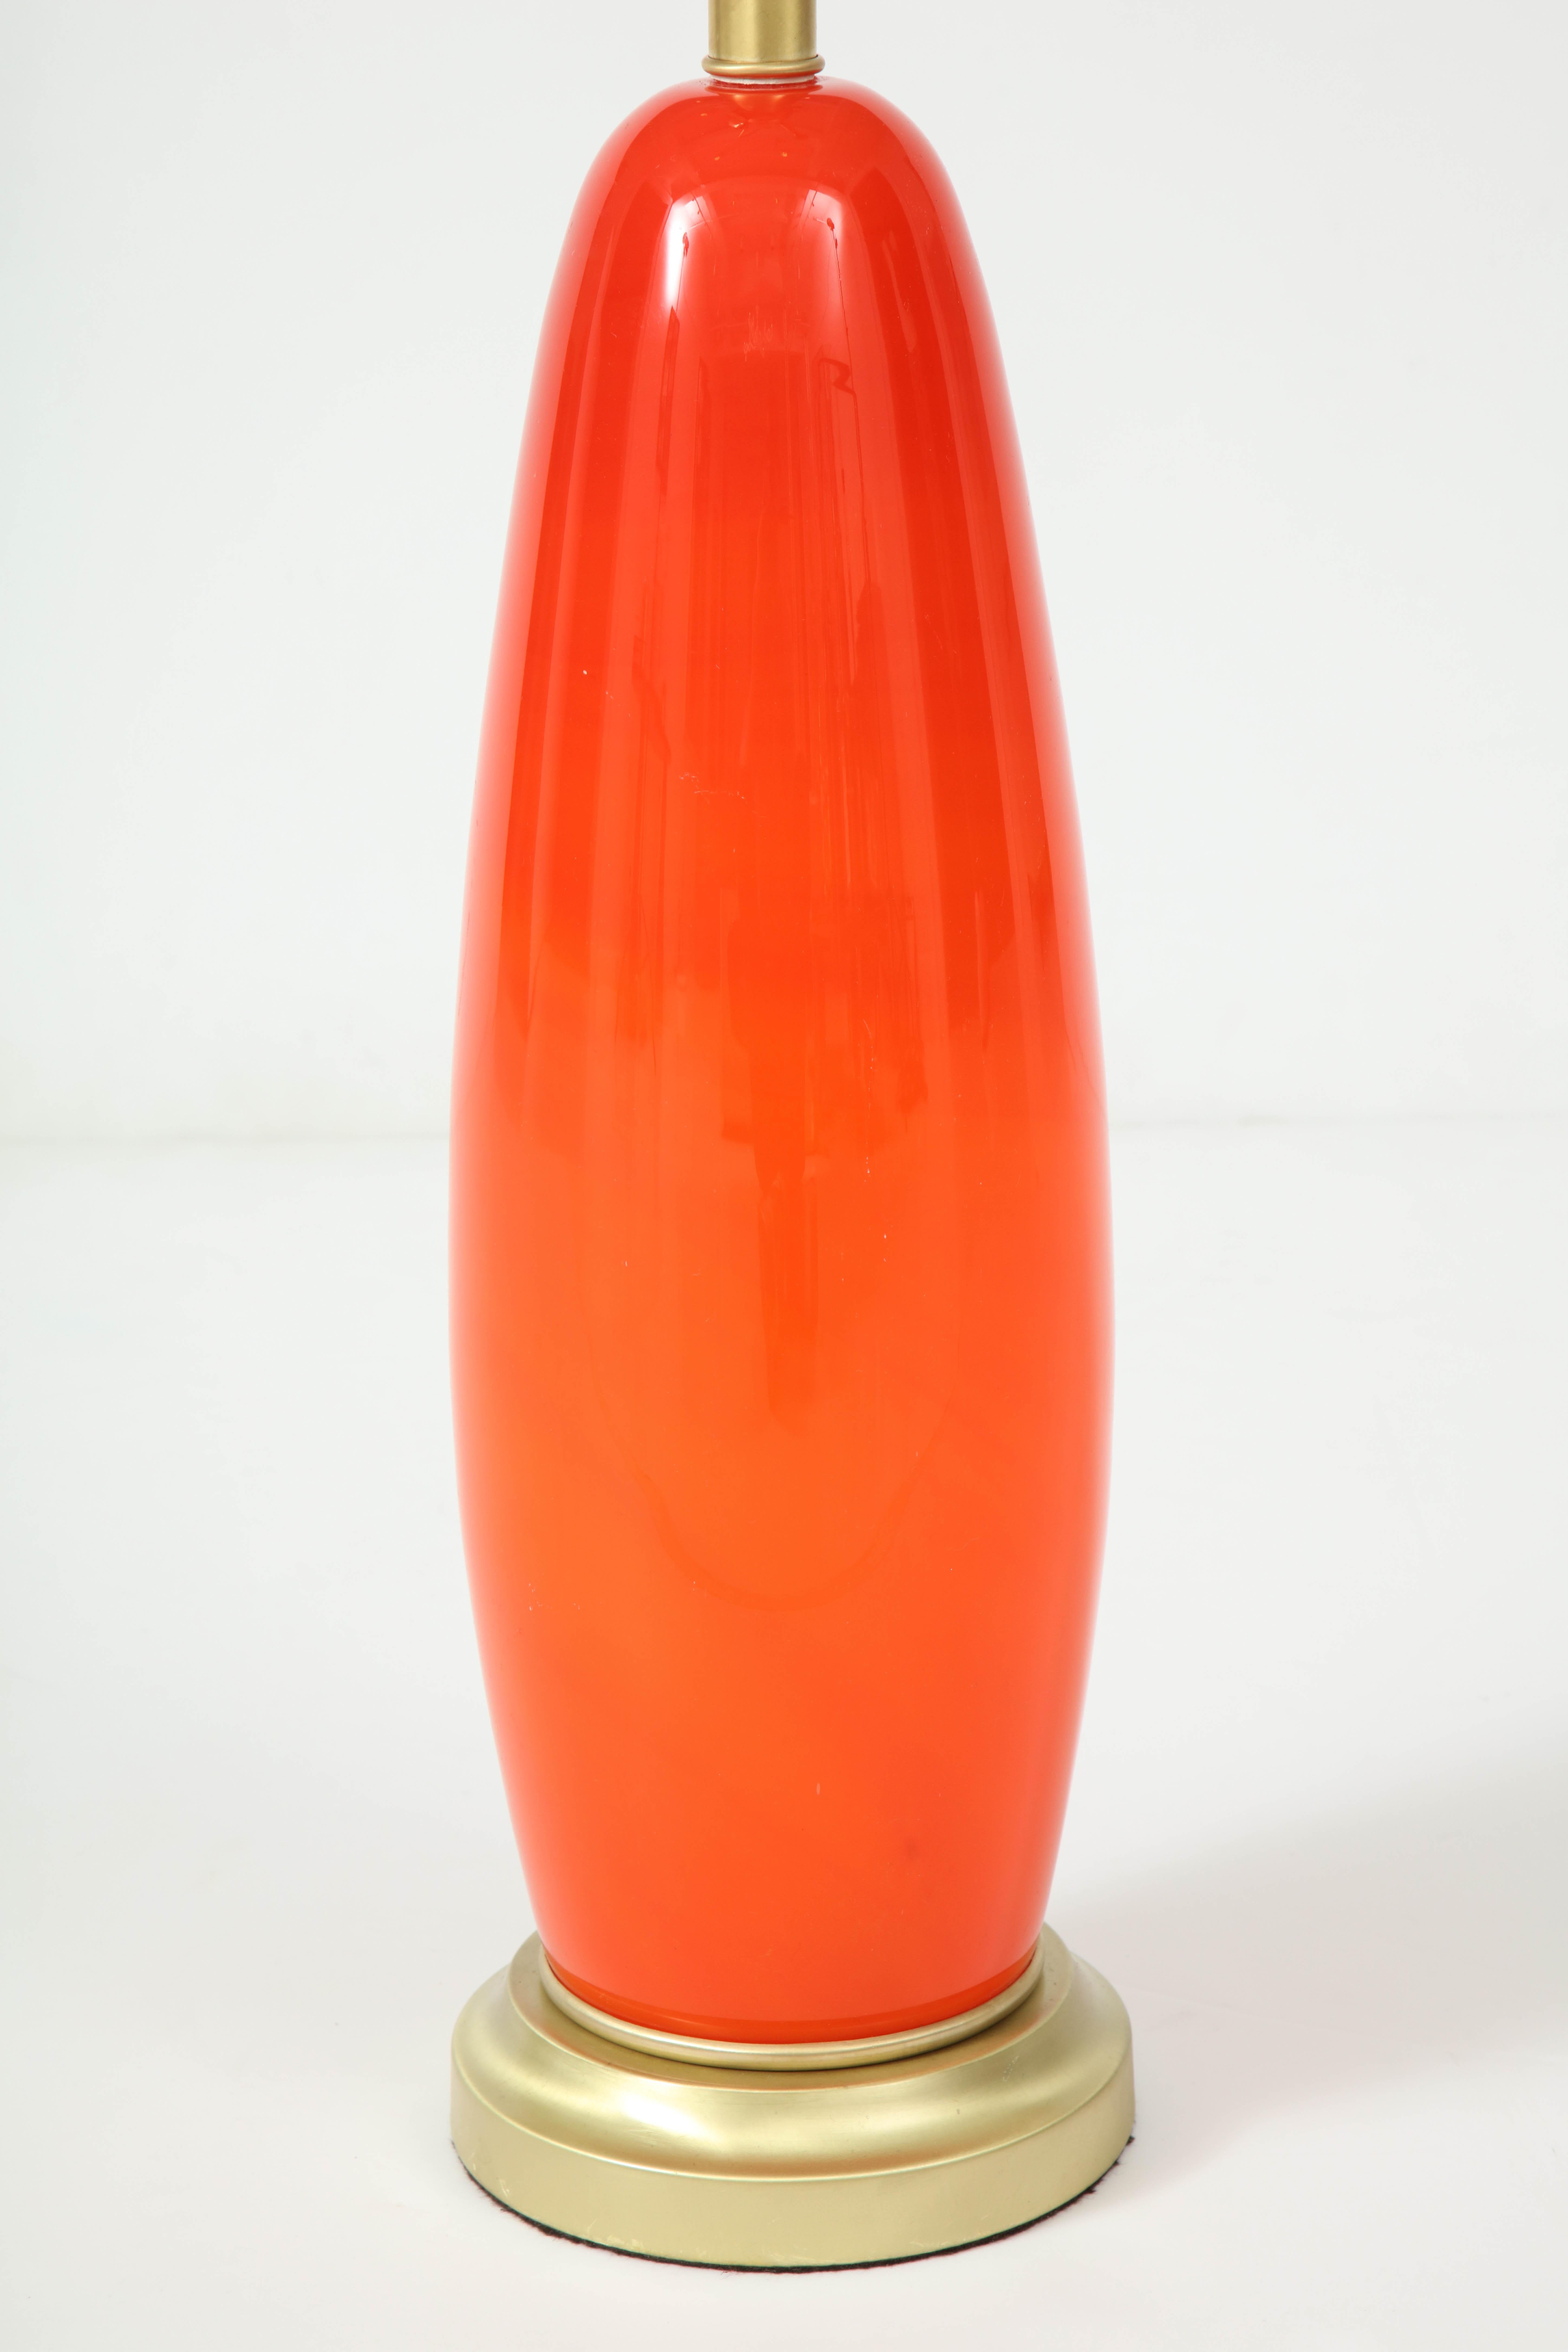 Tangerine Murano Glass Lamp In Excellent Condition For Sale In New York, NY